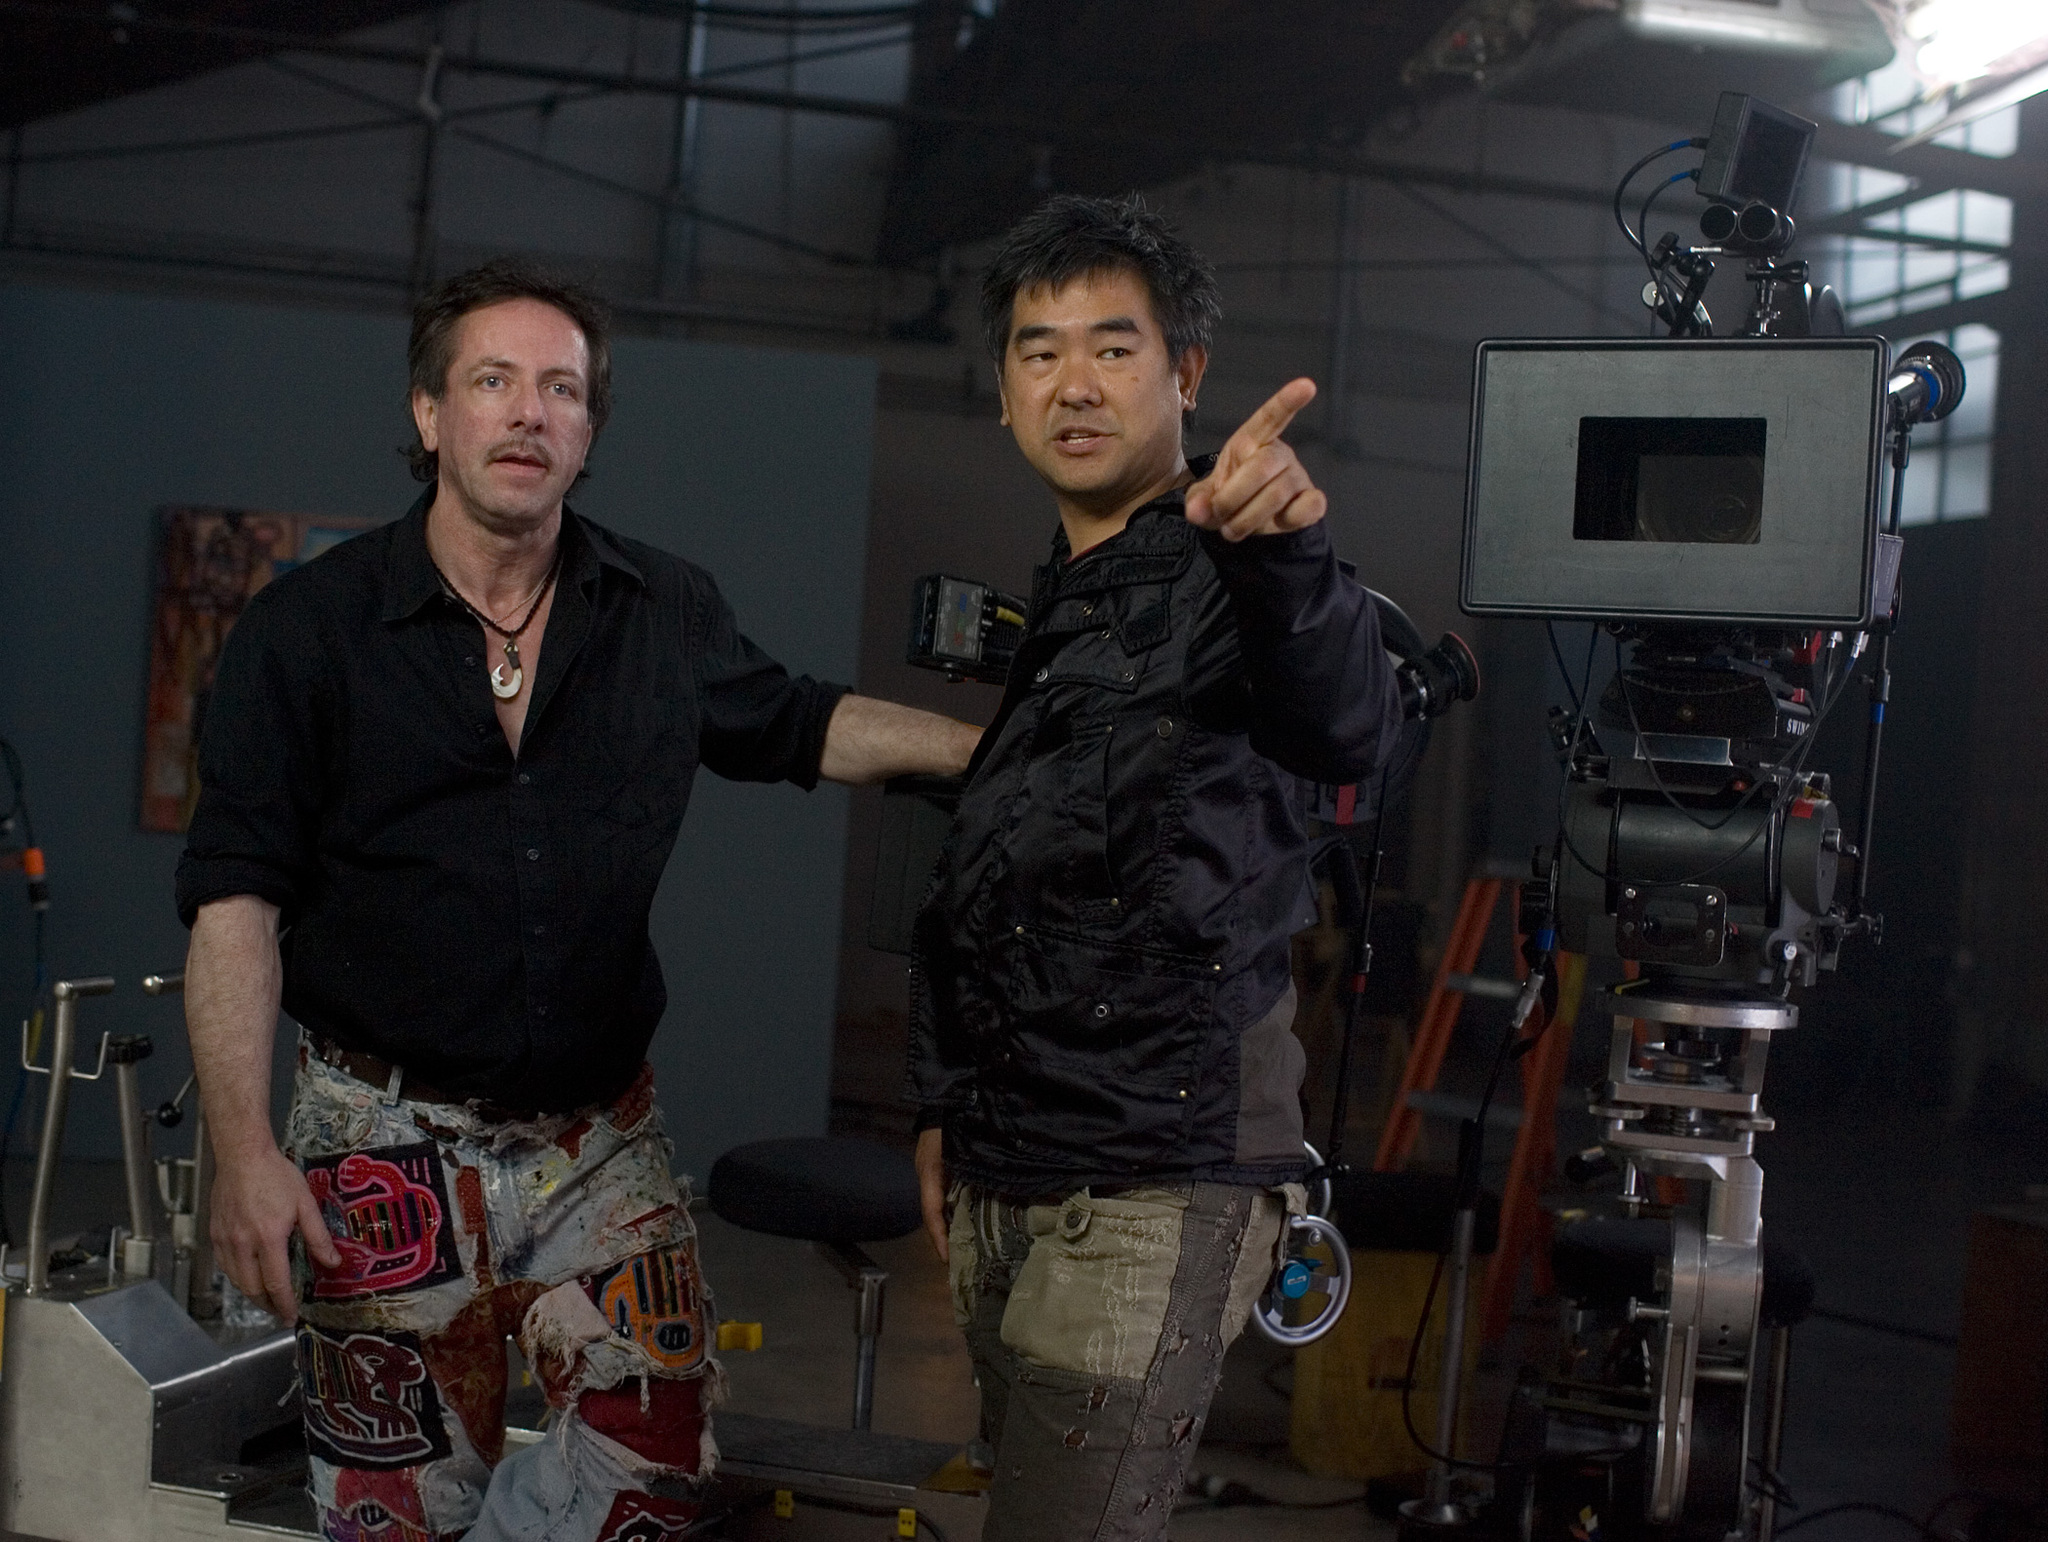 Still of Clive Barker and Ryûhei Kitamura in The Midnight Meat Train (2008)